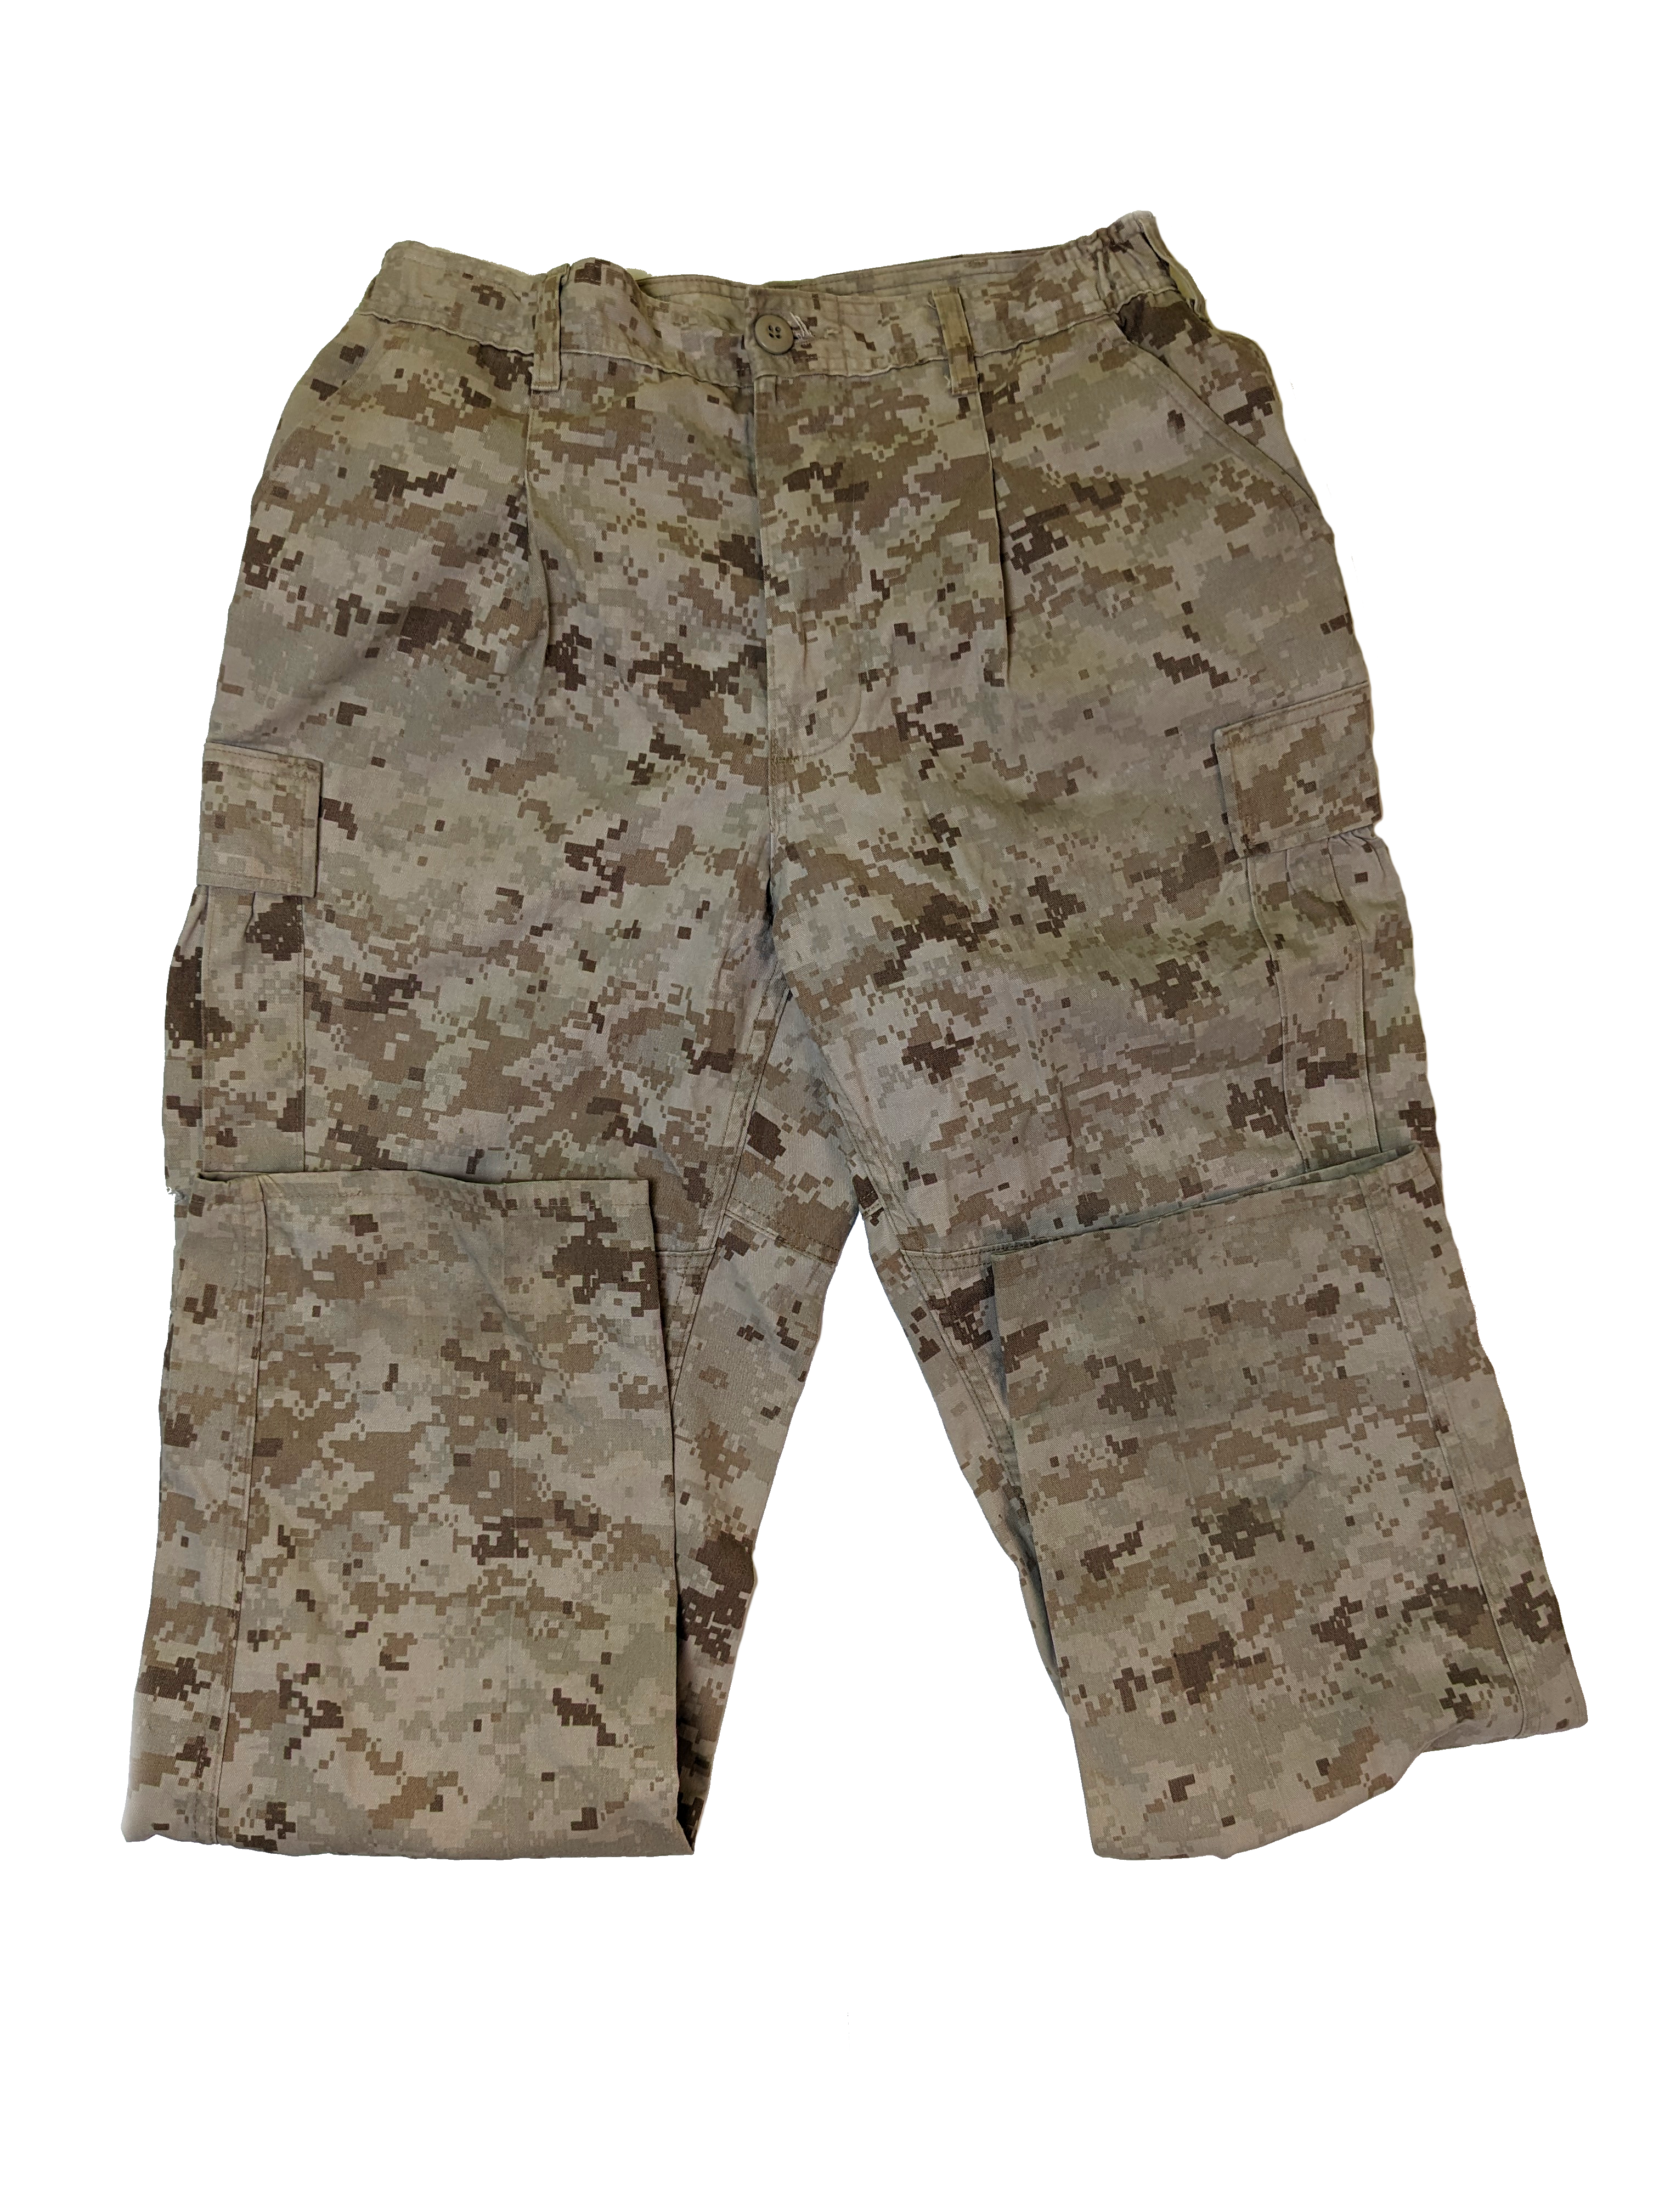 Pants | Desert Camouflage Gore Seam Extended Cold Weather Trousers Pants  Size Xs Xshort | Poshmark